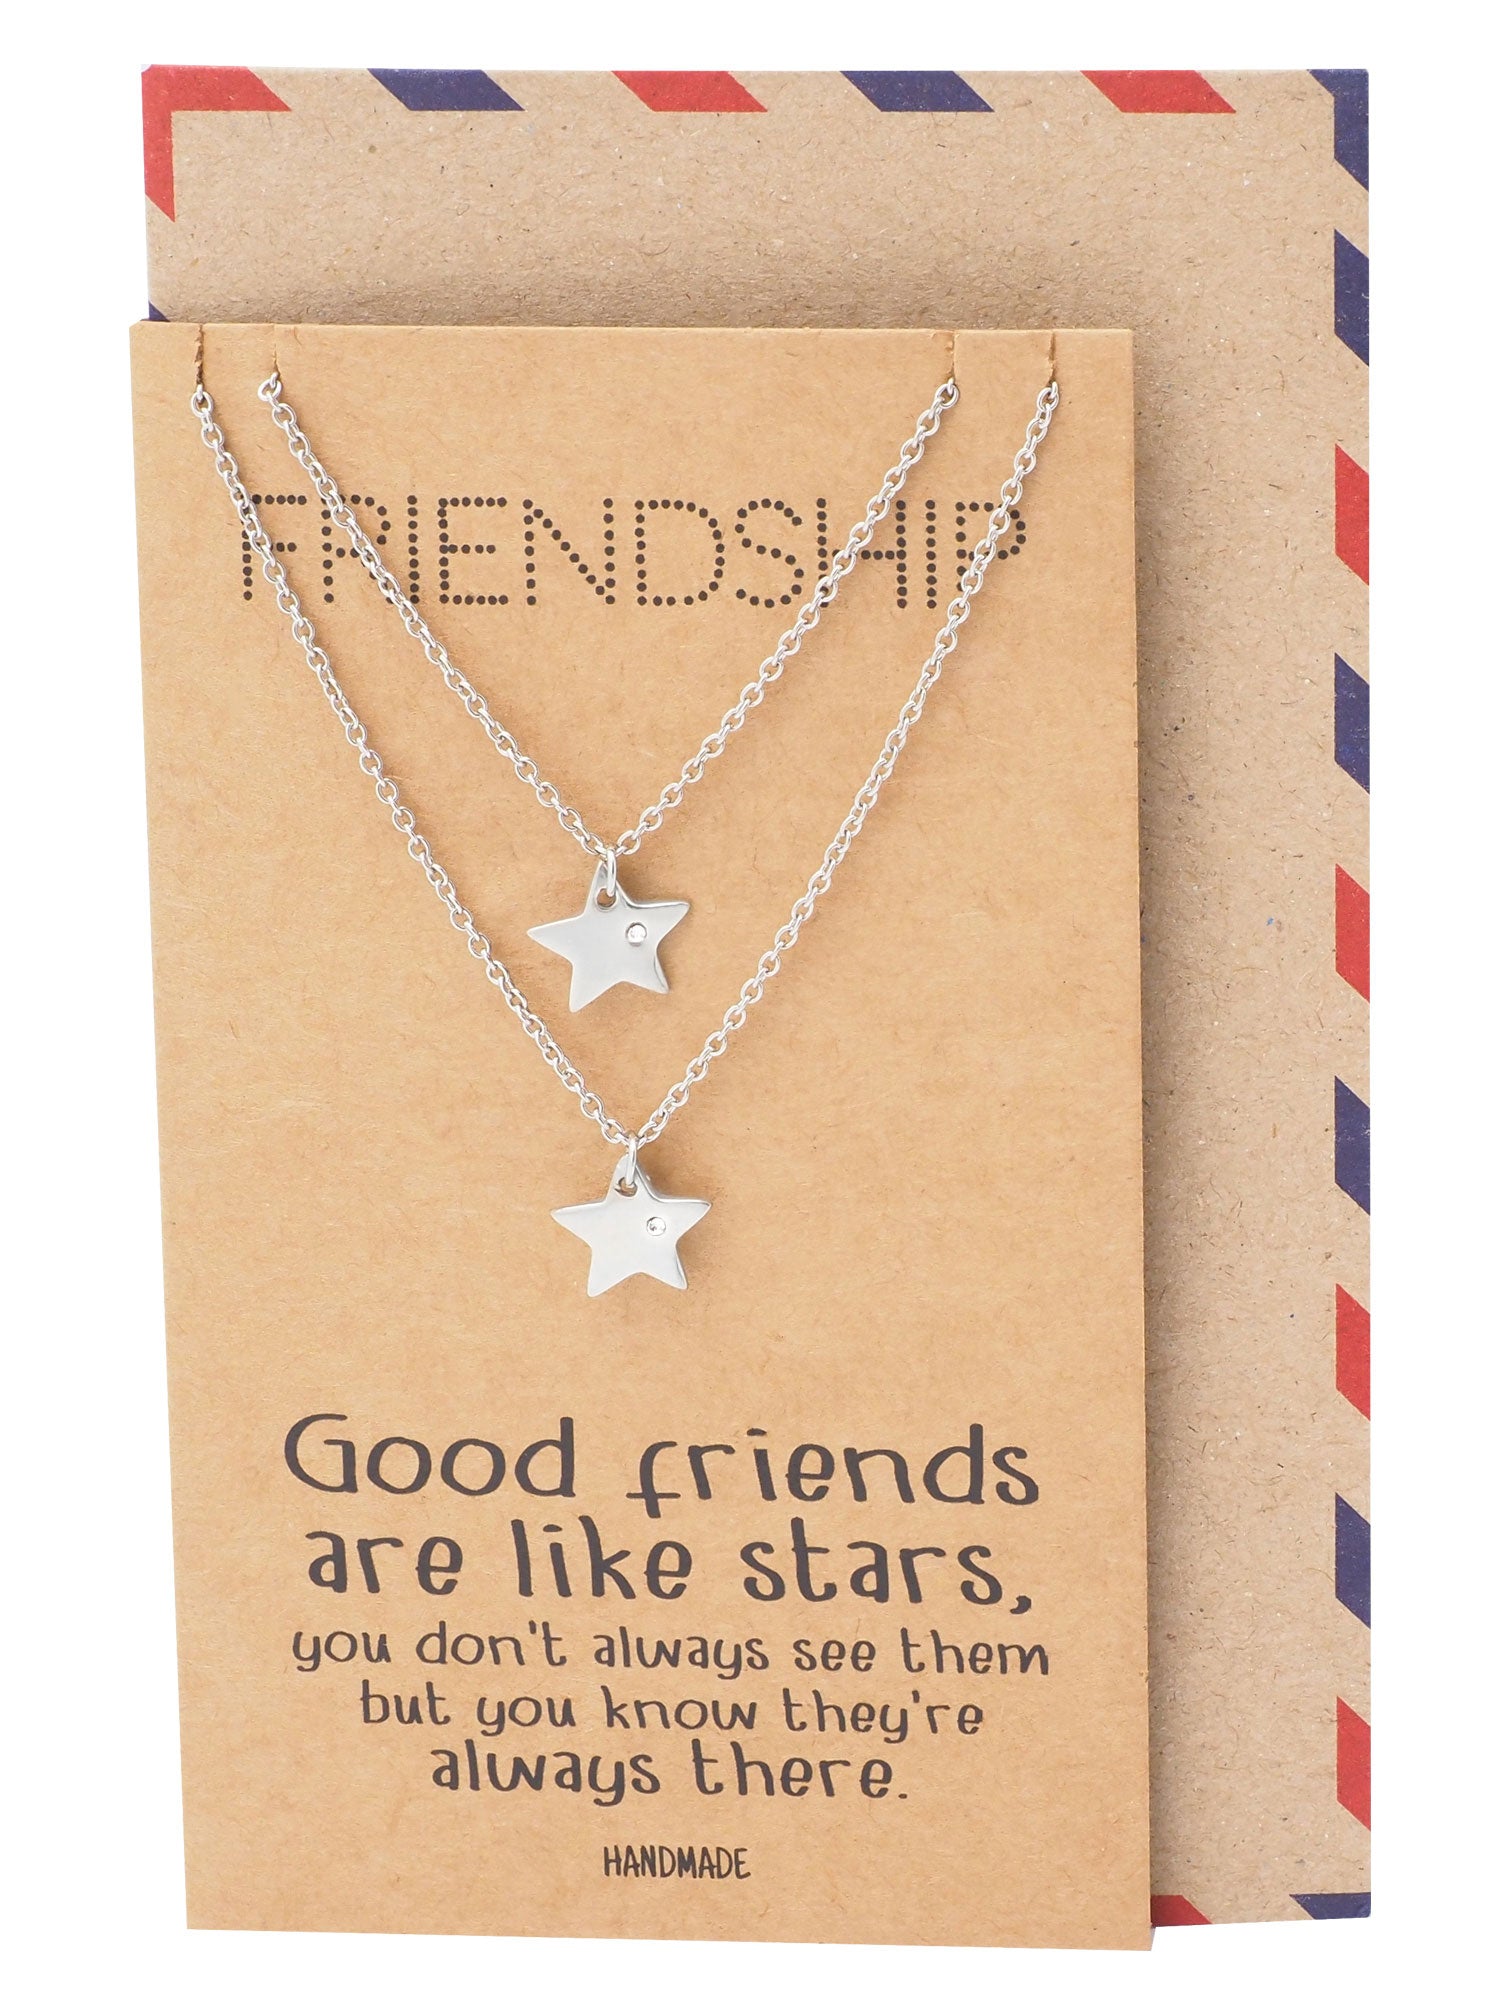 Buy BFF Best Friend Gift Necklaces for 2 Girls Friendship Necklace for  Women Friends Half Heart Necklace for Bestie Matching Necklaces for best  friends Christmas Birthday Gift at Amazon.in